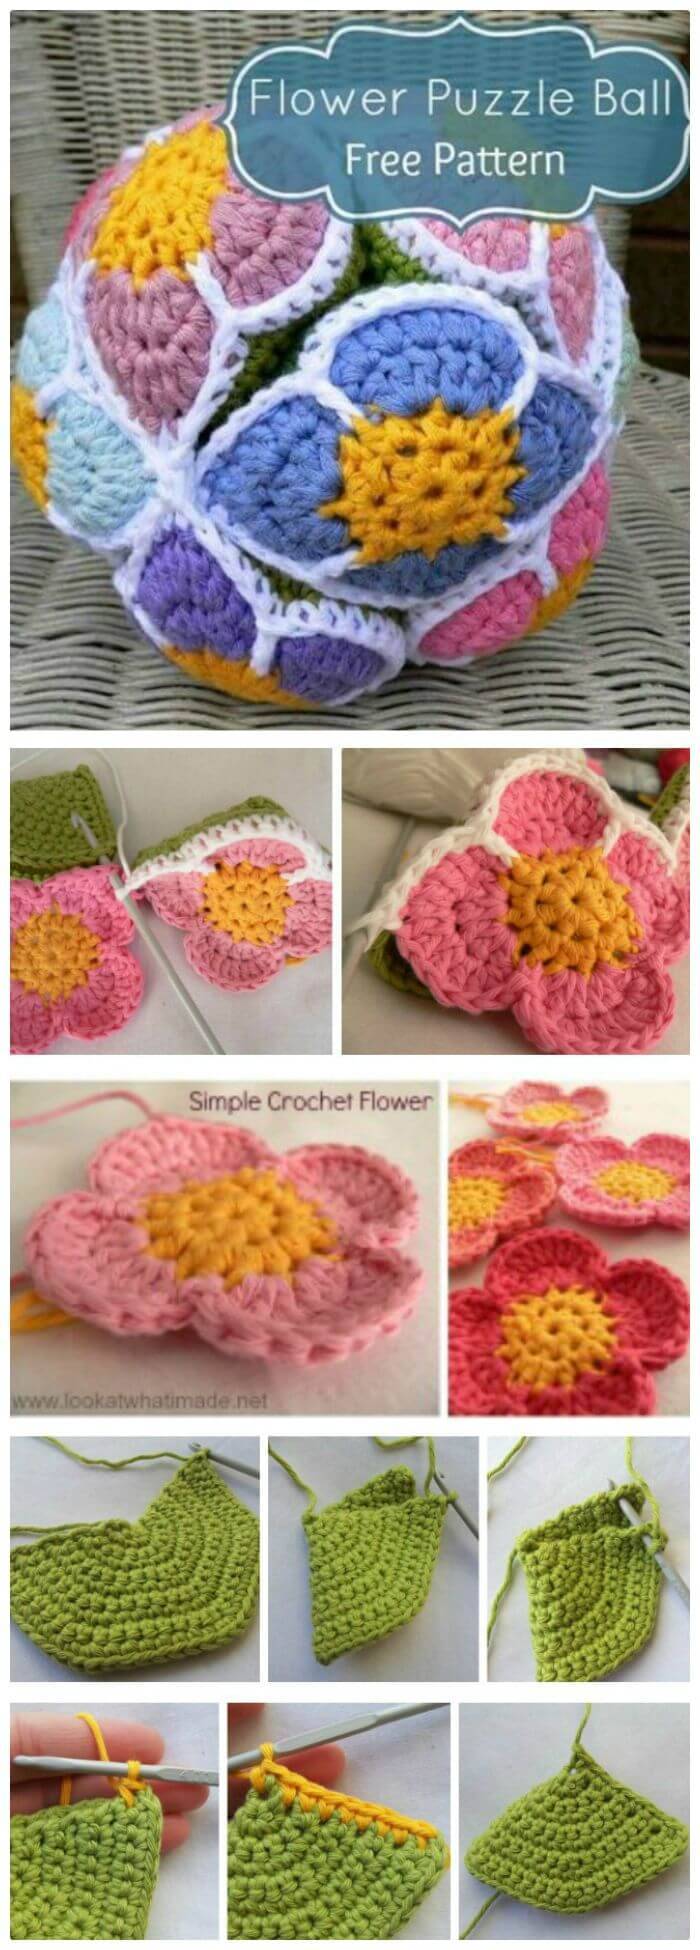 DIY Crochet Flower Ball Pattern, Easy and quick crochet flowers patterns with free guides!